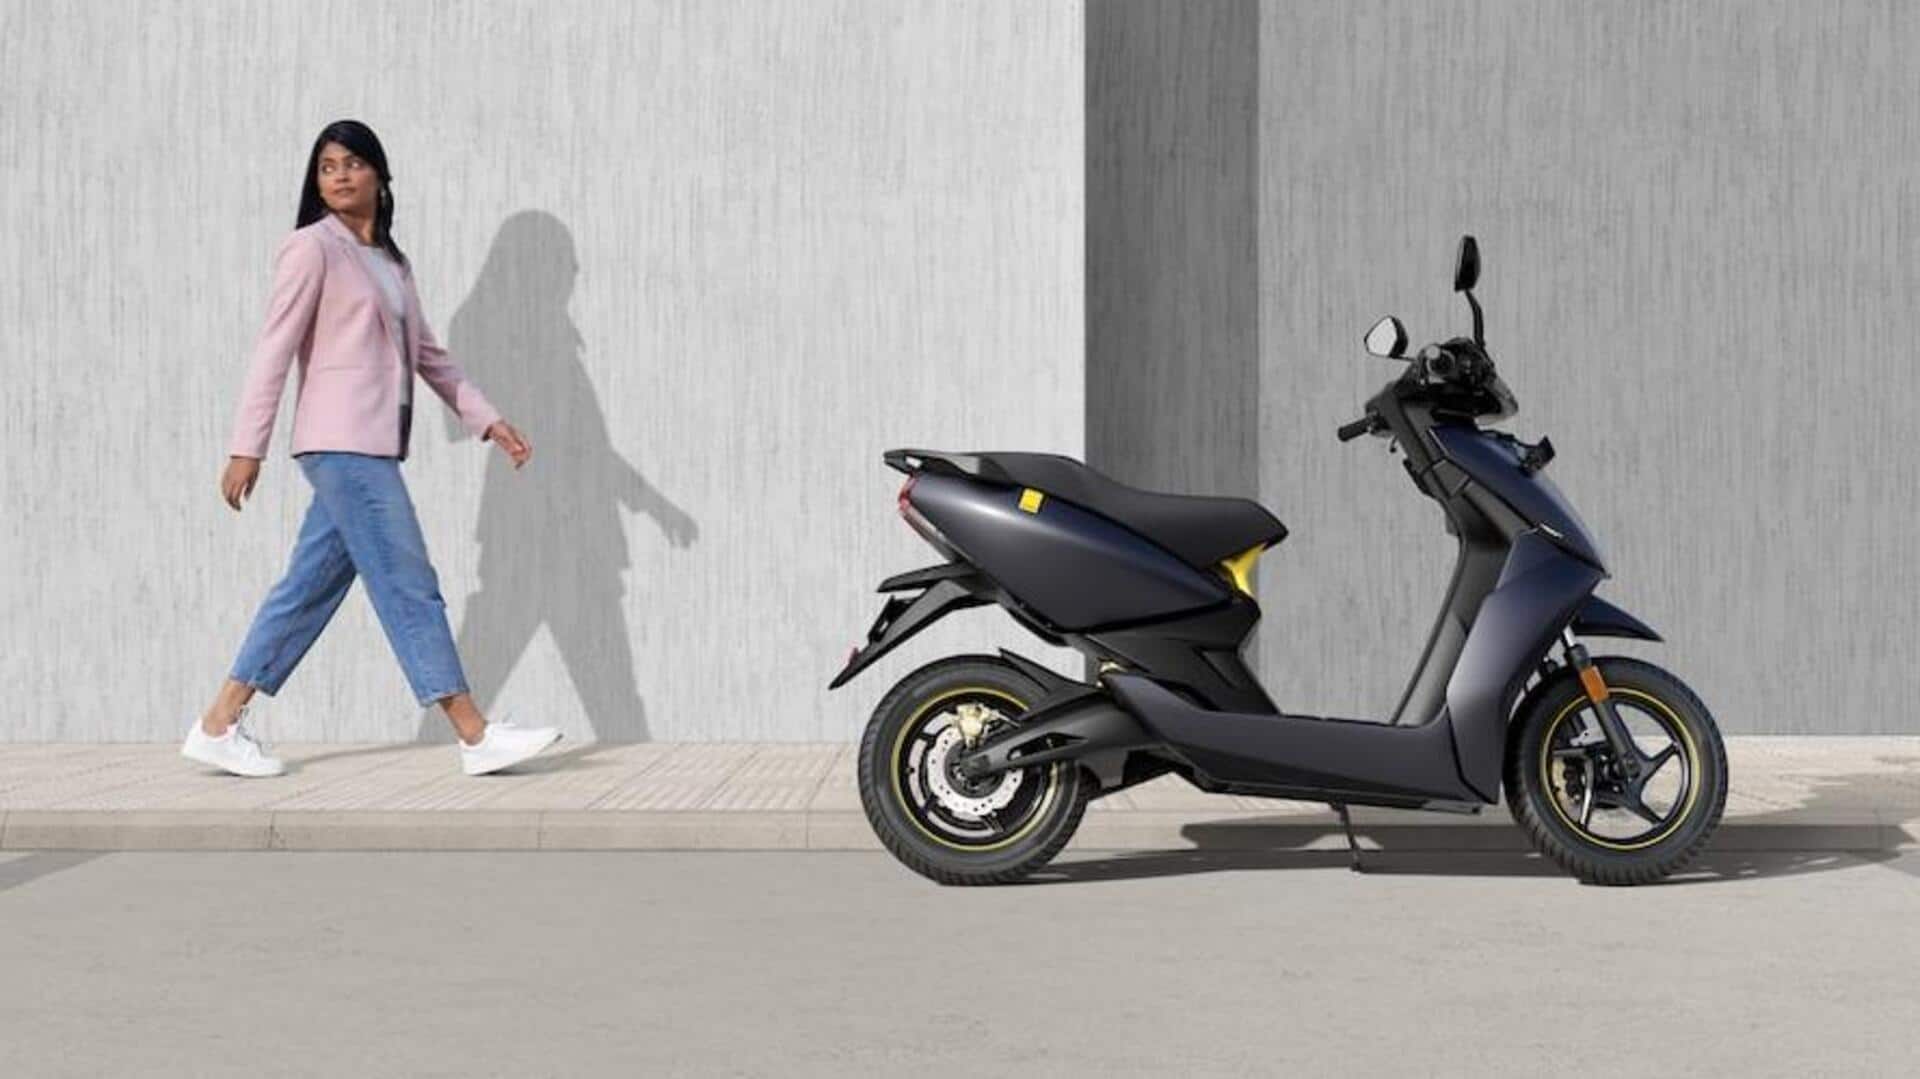 Order books open for Ather 450S e-scooter: What to expect